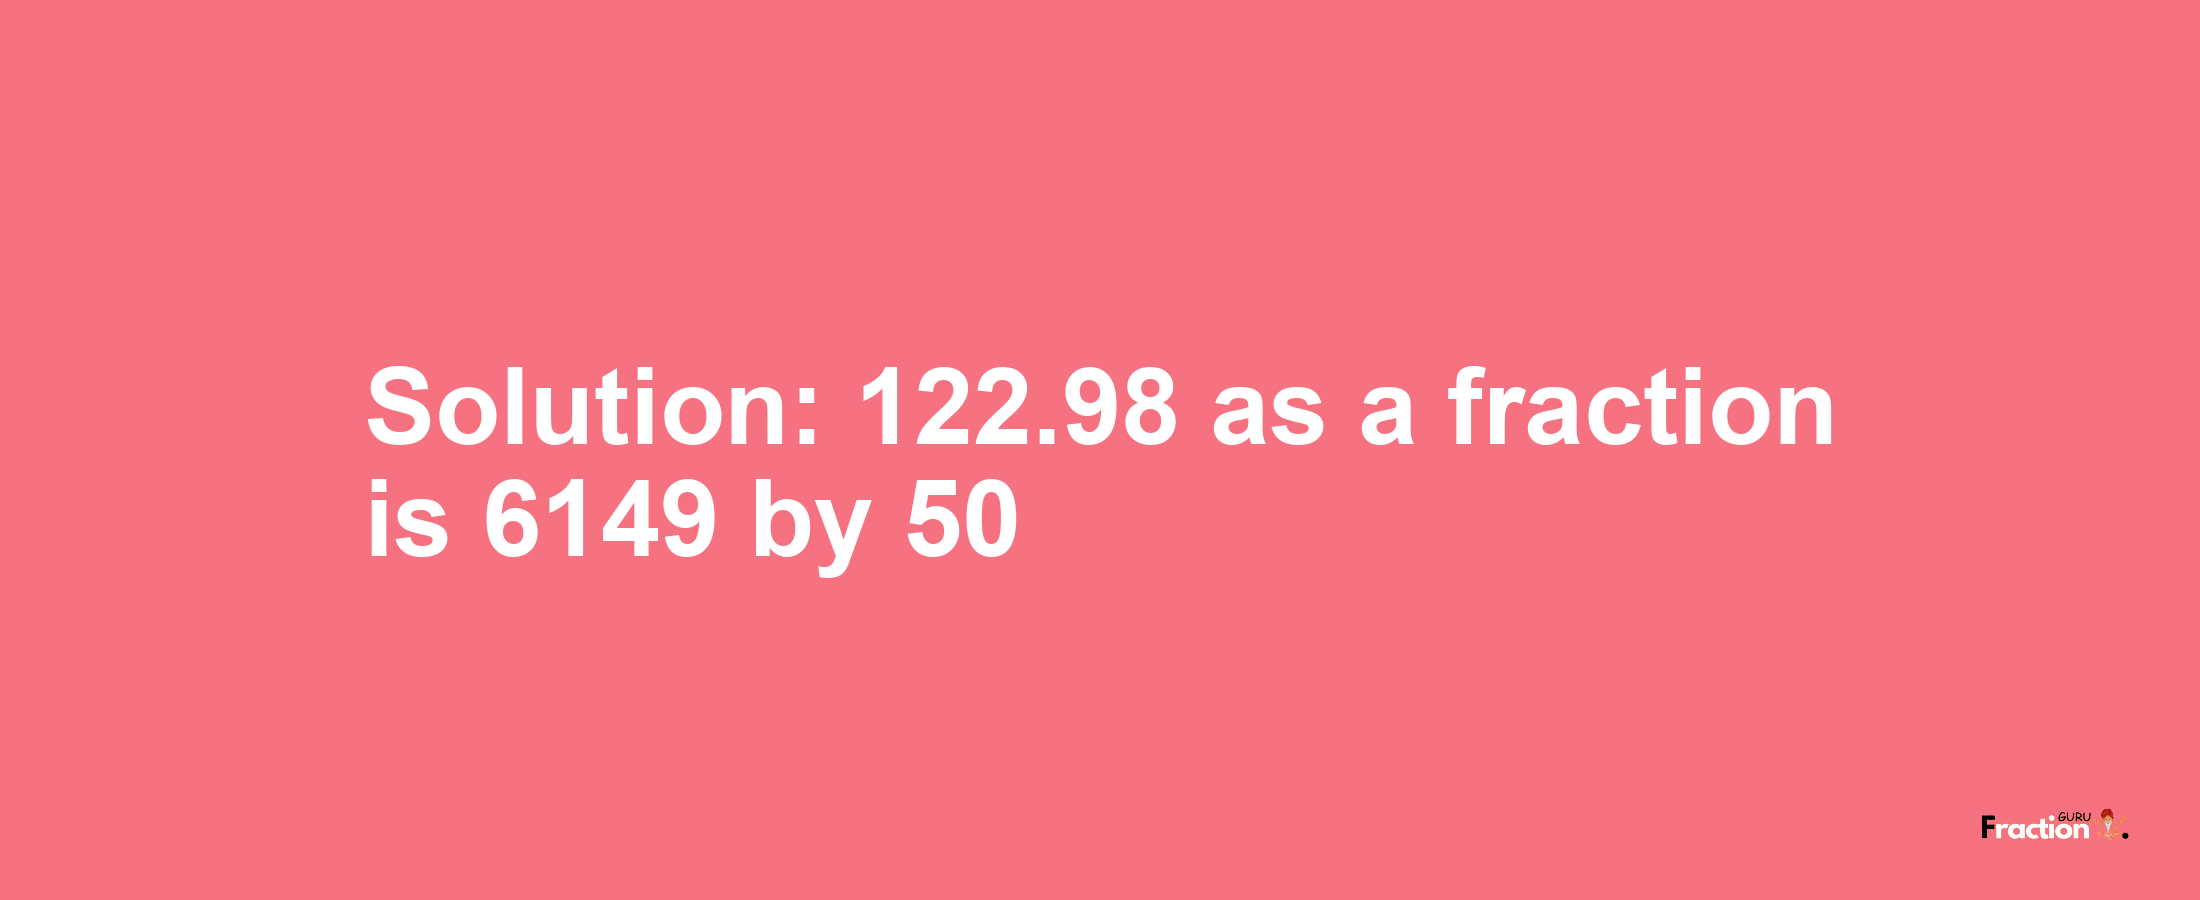 Solution:122.98 as a fraction is 6149/50